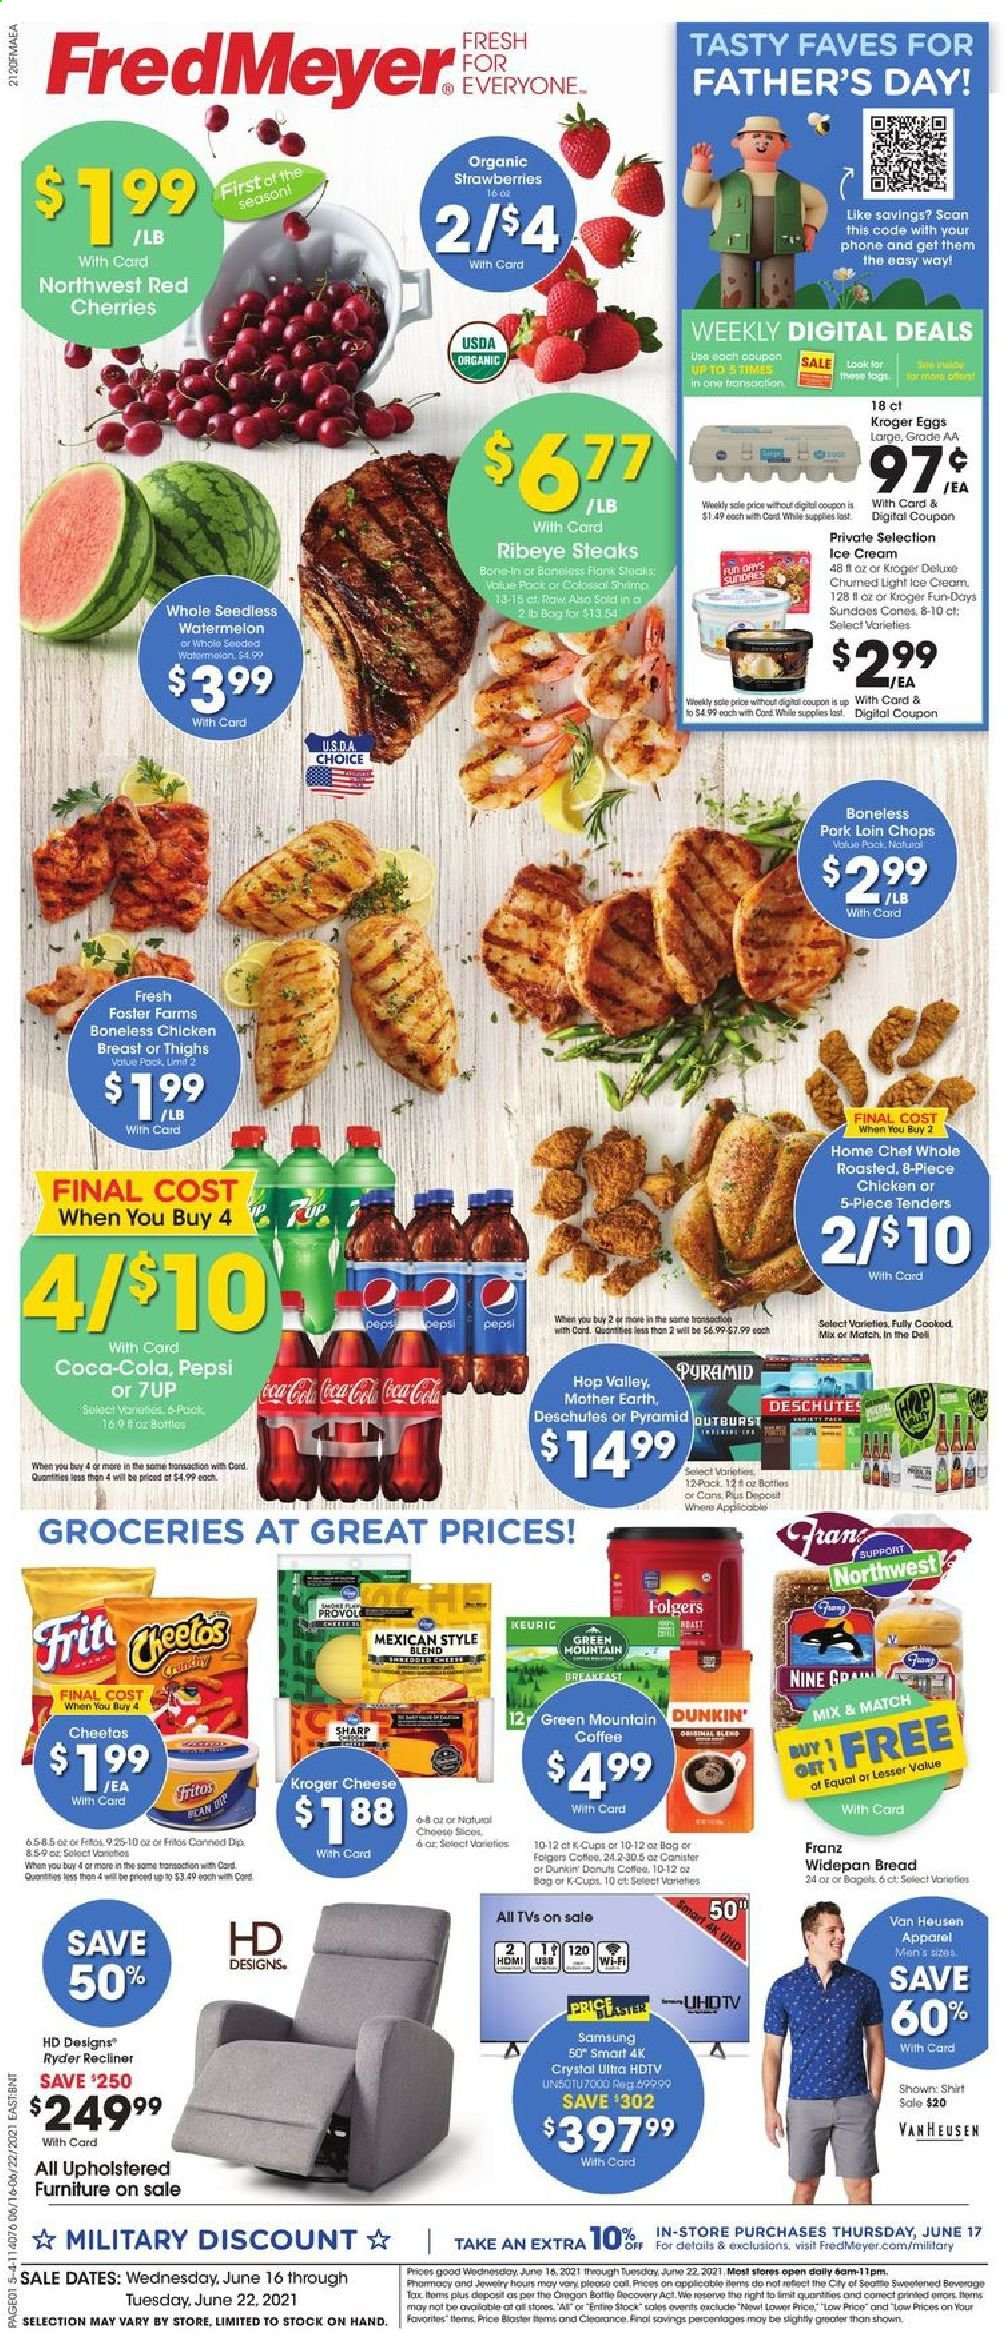 thumbnail - Fred Meyer Flyer - 06/16/2021 - 06/22/2021 - Sales products - Dell, bread, strawberries, watermelon, cherries, shrimps, cheese, eggs, dip, ice cream, Mother Earth, Fritos, Cheetos, Coca-Cola, Pepsi, 7UP, coffee, Folgers, coffee capsules, K-Cups, Keurig, Green Mountain, chicken breasts, beef meat, steak, ribeye steak, pork chops, pork loin, pork meat, canister, Sharp, Samsung, UHD TV, HDTV, TV. Page 1.